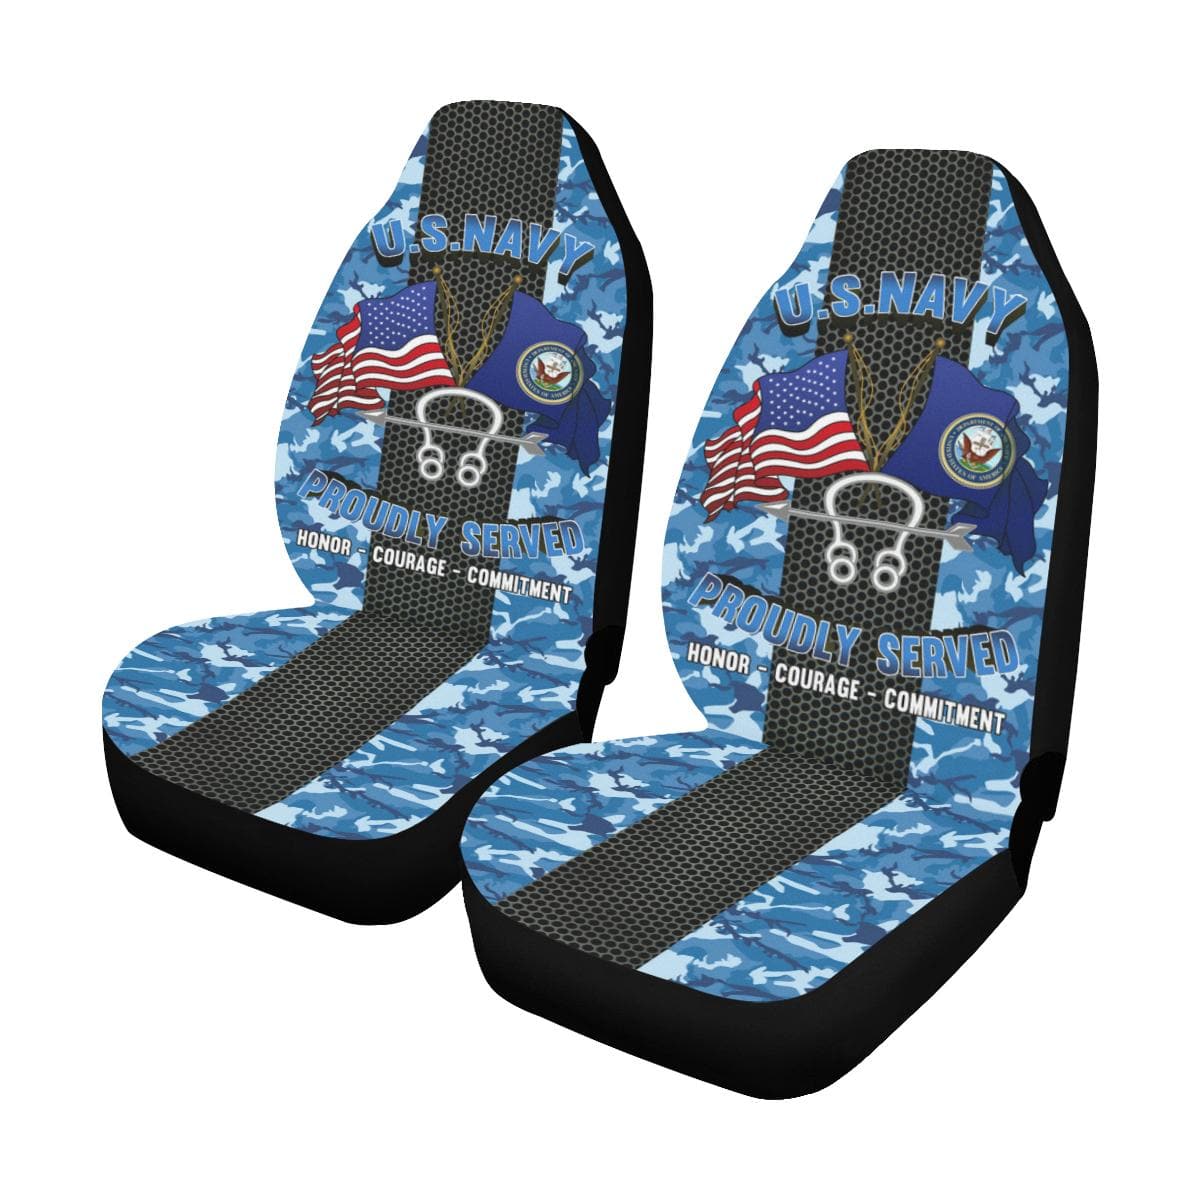 Navy Sonar Technician Navy ST Car Seat Covers (Set of 2)-SeatCovers-Navy-Rate-Veterans Nation